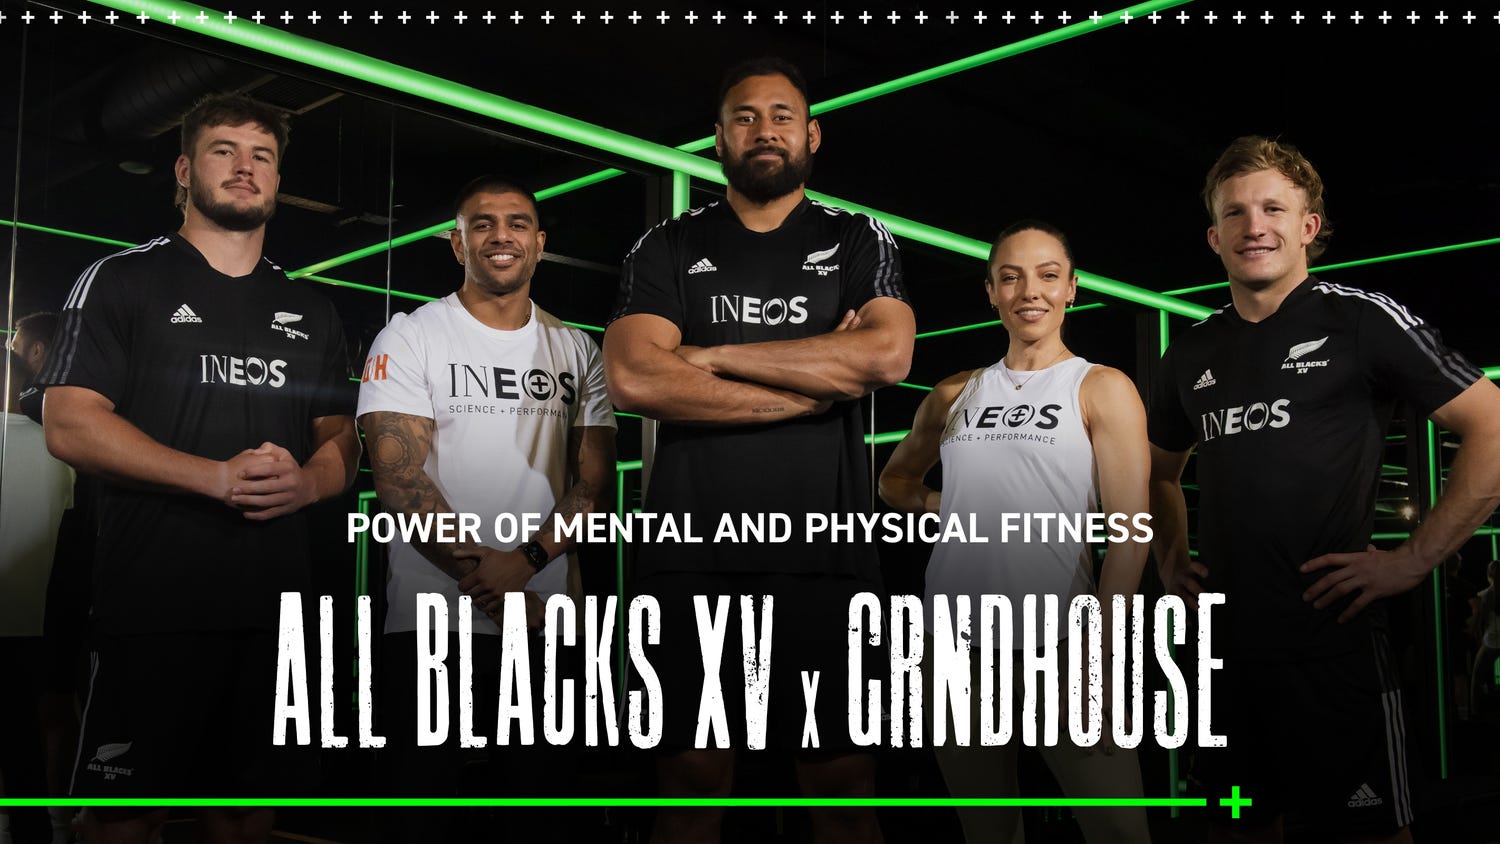 ALL BLACKS XV x GRNDHOUSE - THE POWER OF MENTAL AND PHYSICAL FITNESS